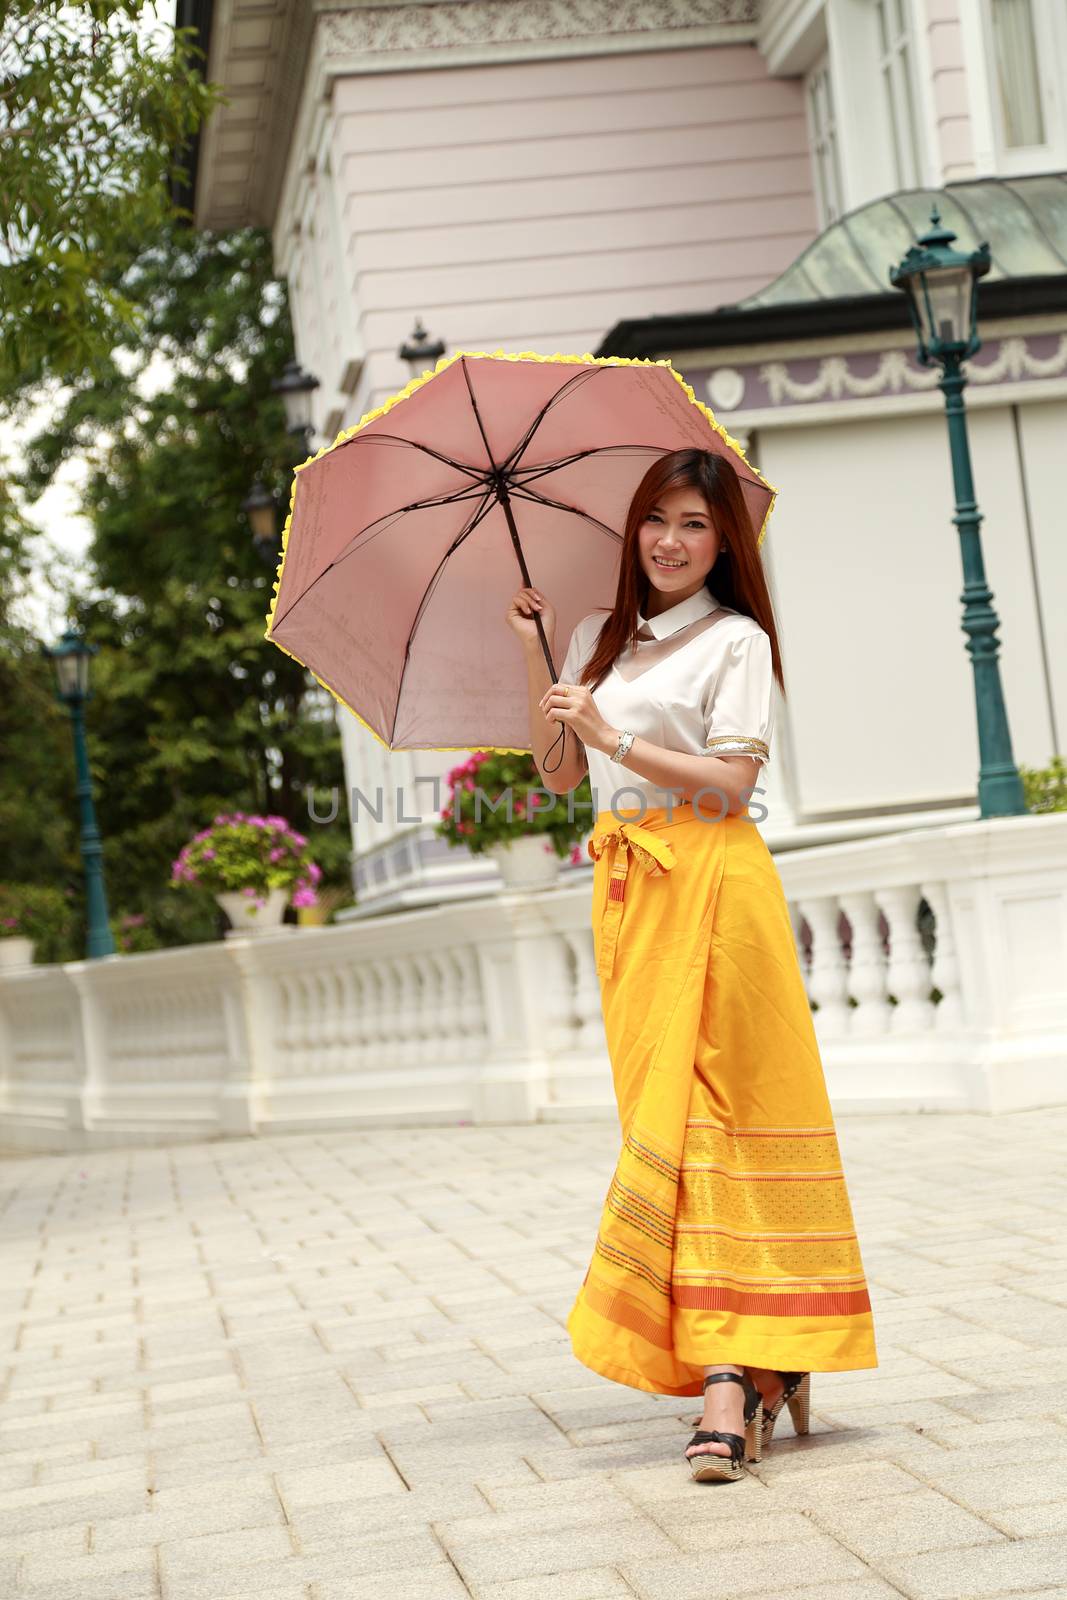 Thai girl dressing and umbrella with traditional style (palace background)